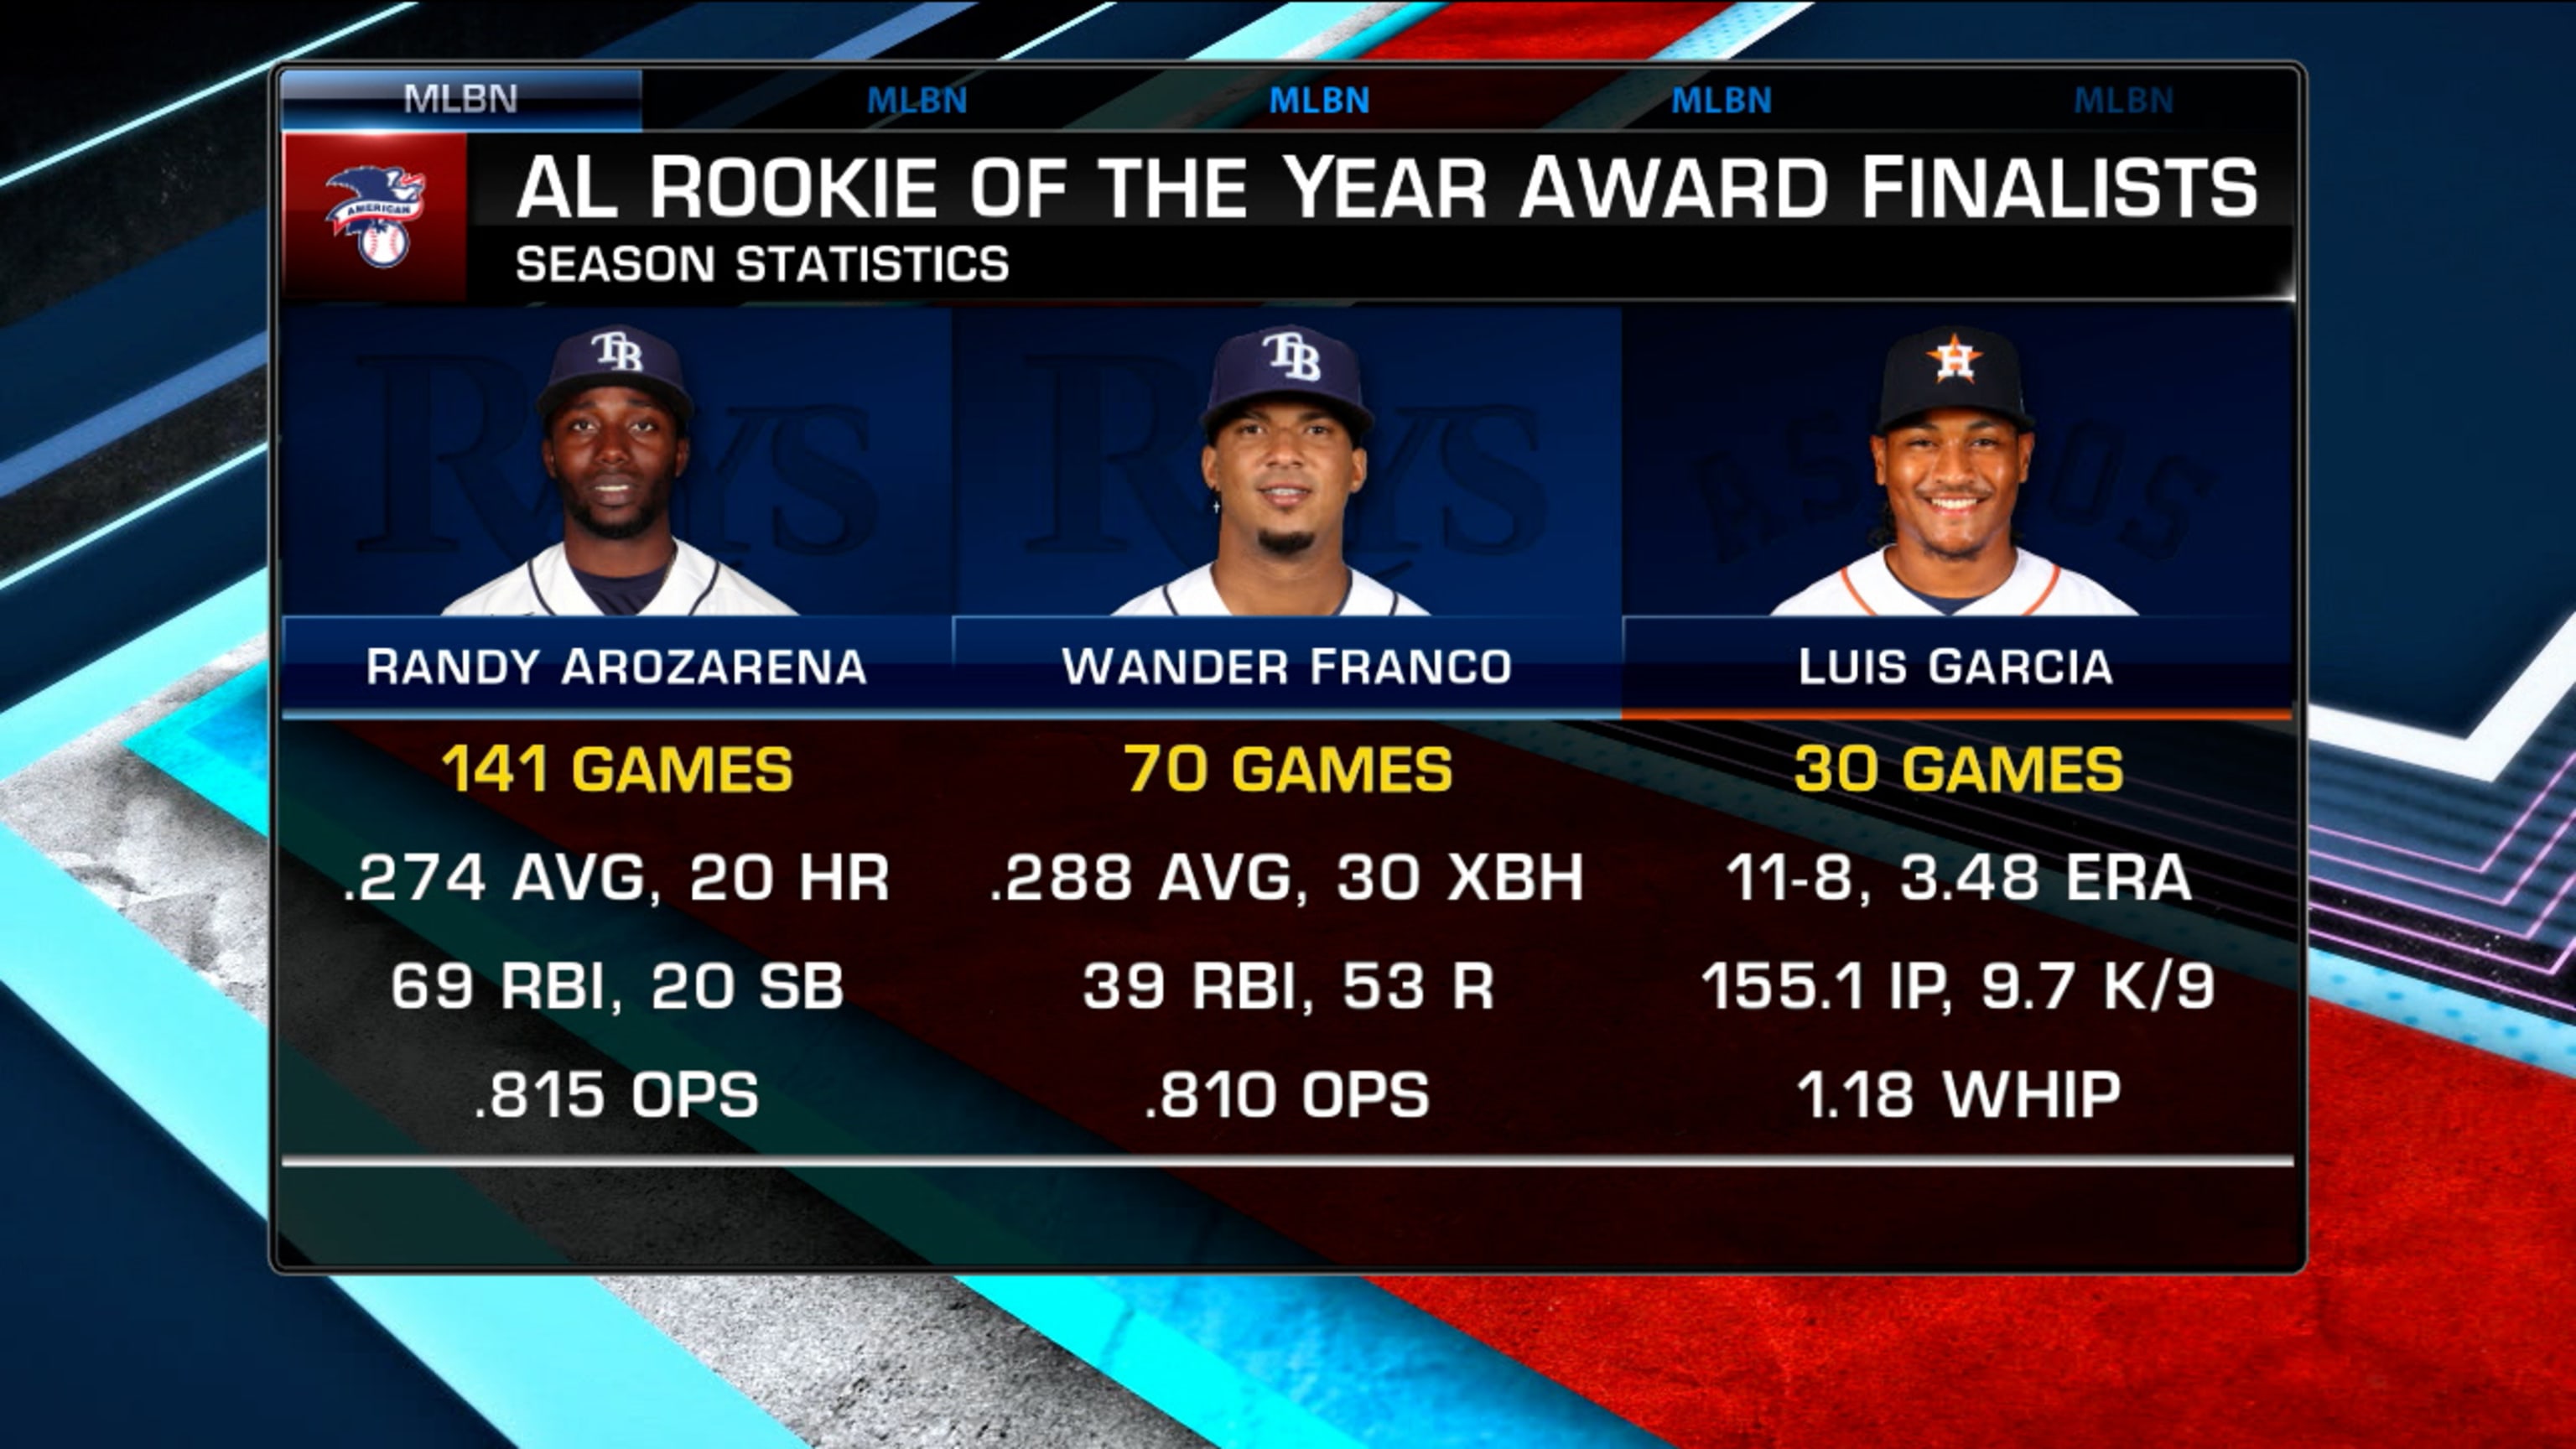 Randy Arozarena wins the AL Rookie of the Year